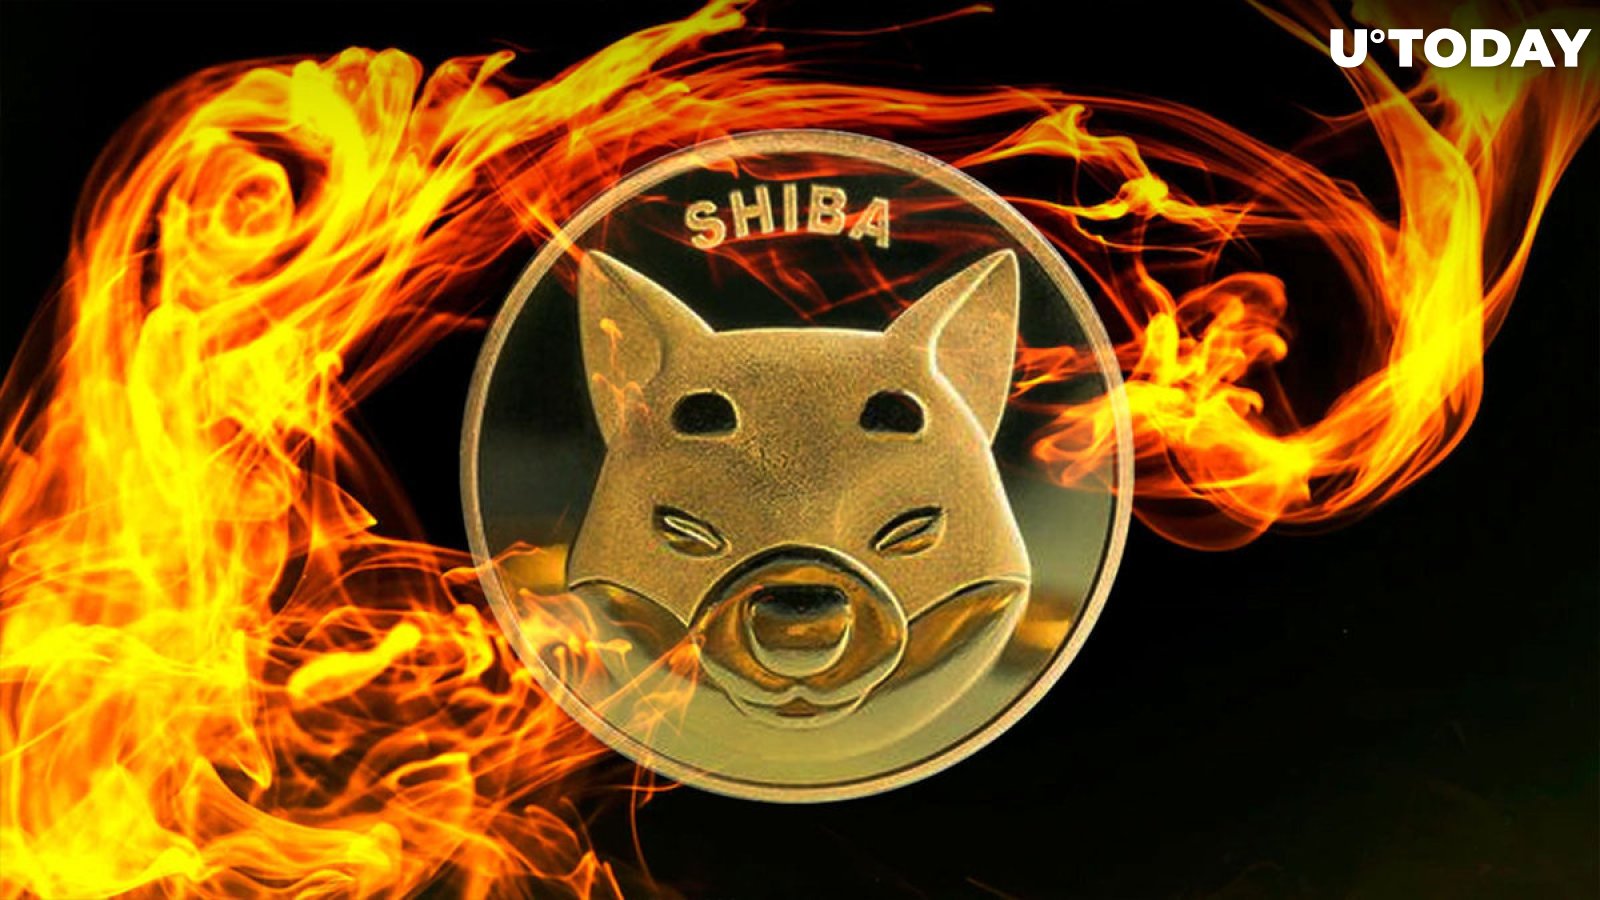 303.7 Million SHIB Burned in Last 7 Days as Burn Activity Faces Decline, so Does Price